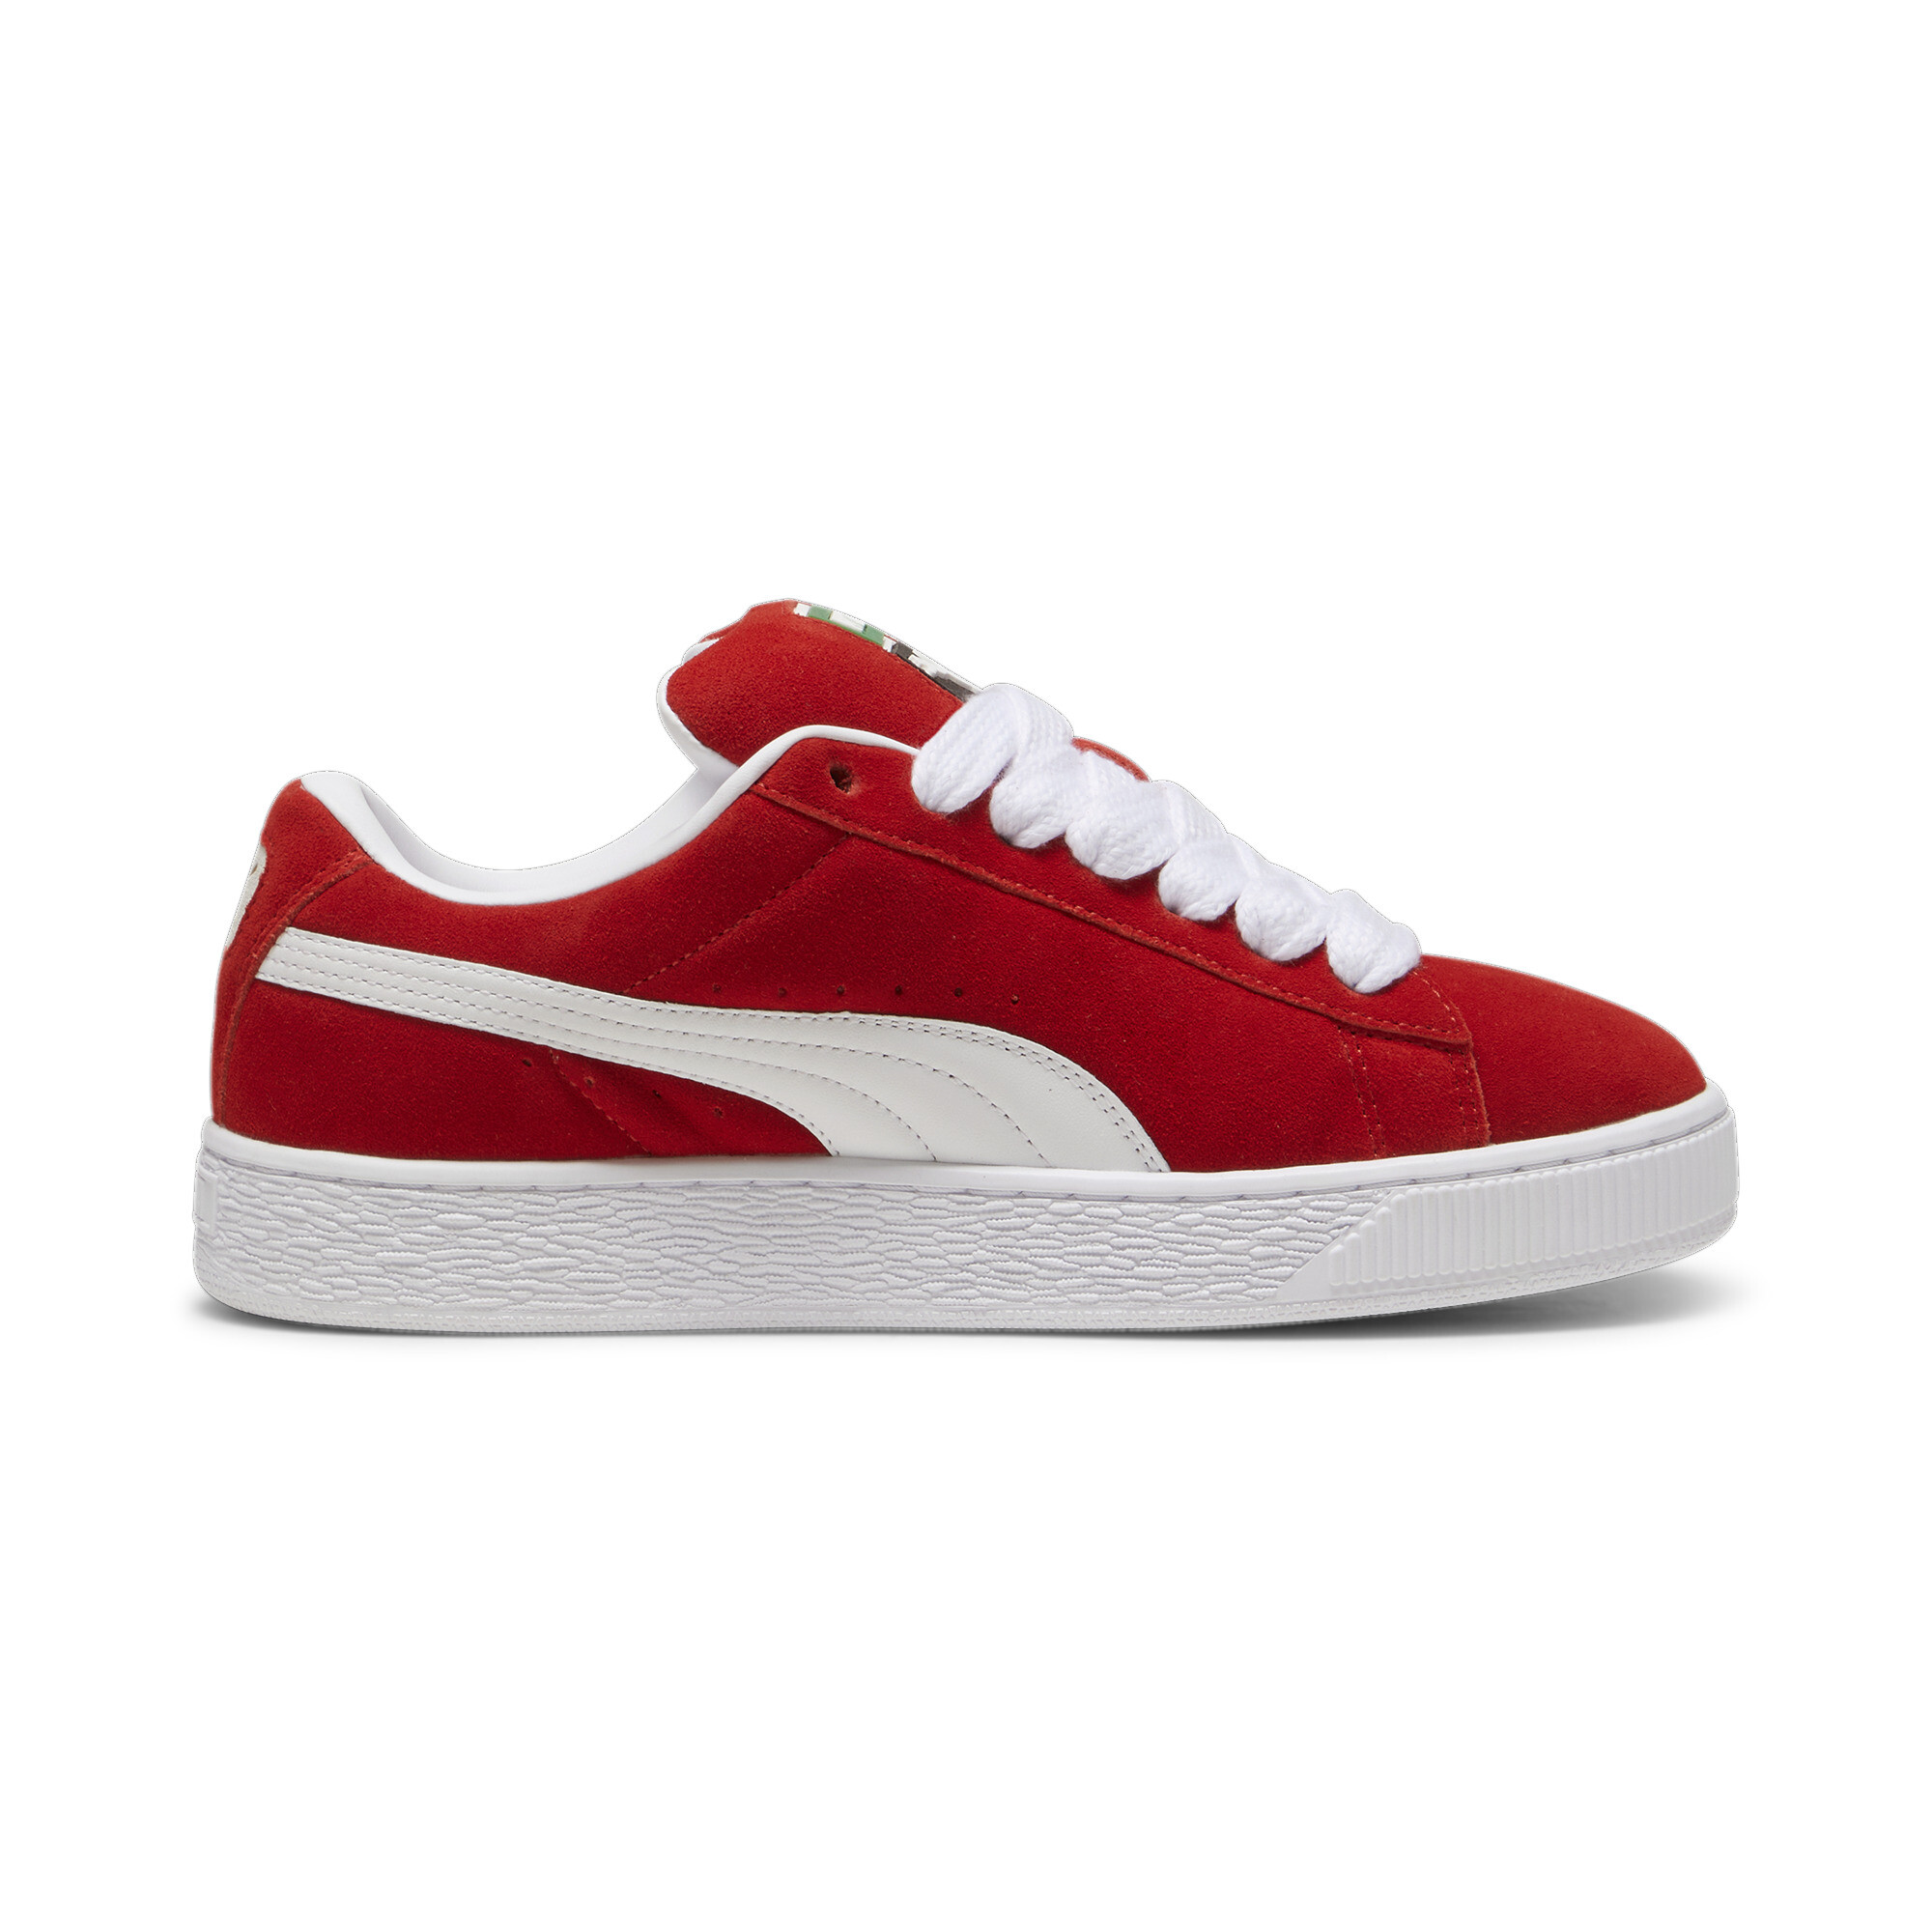 Puma Suede XL Sneakers Unisex, Red, Size 36, Shoes